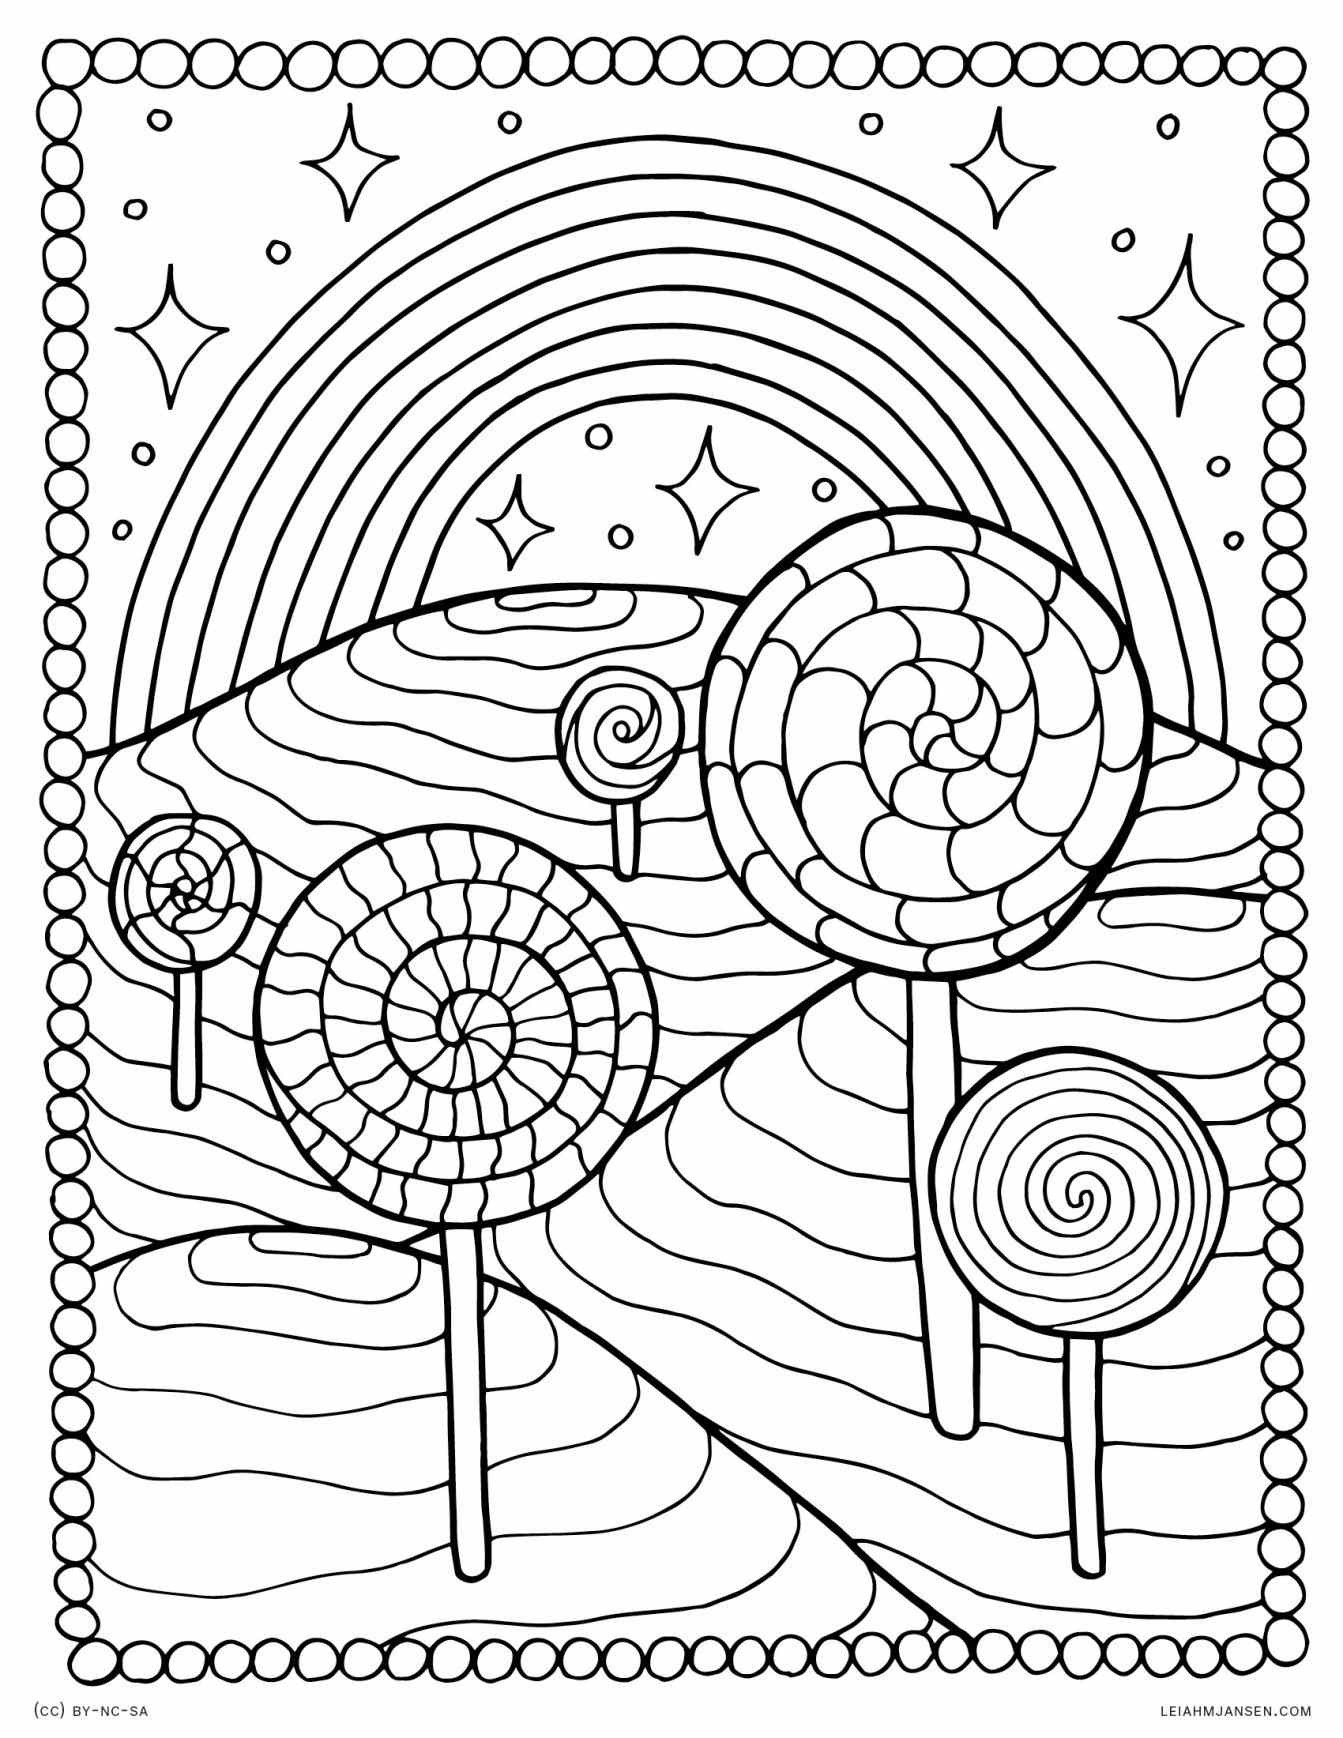 Lollipop Coloring Pages
 Candy Coloring Pages To Print Cane Exciting grig3